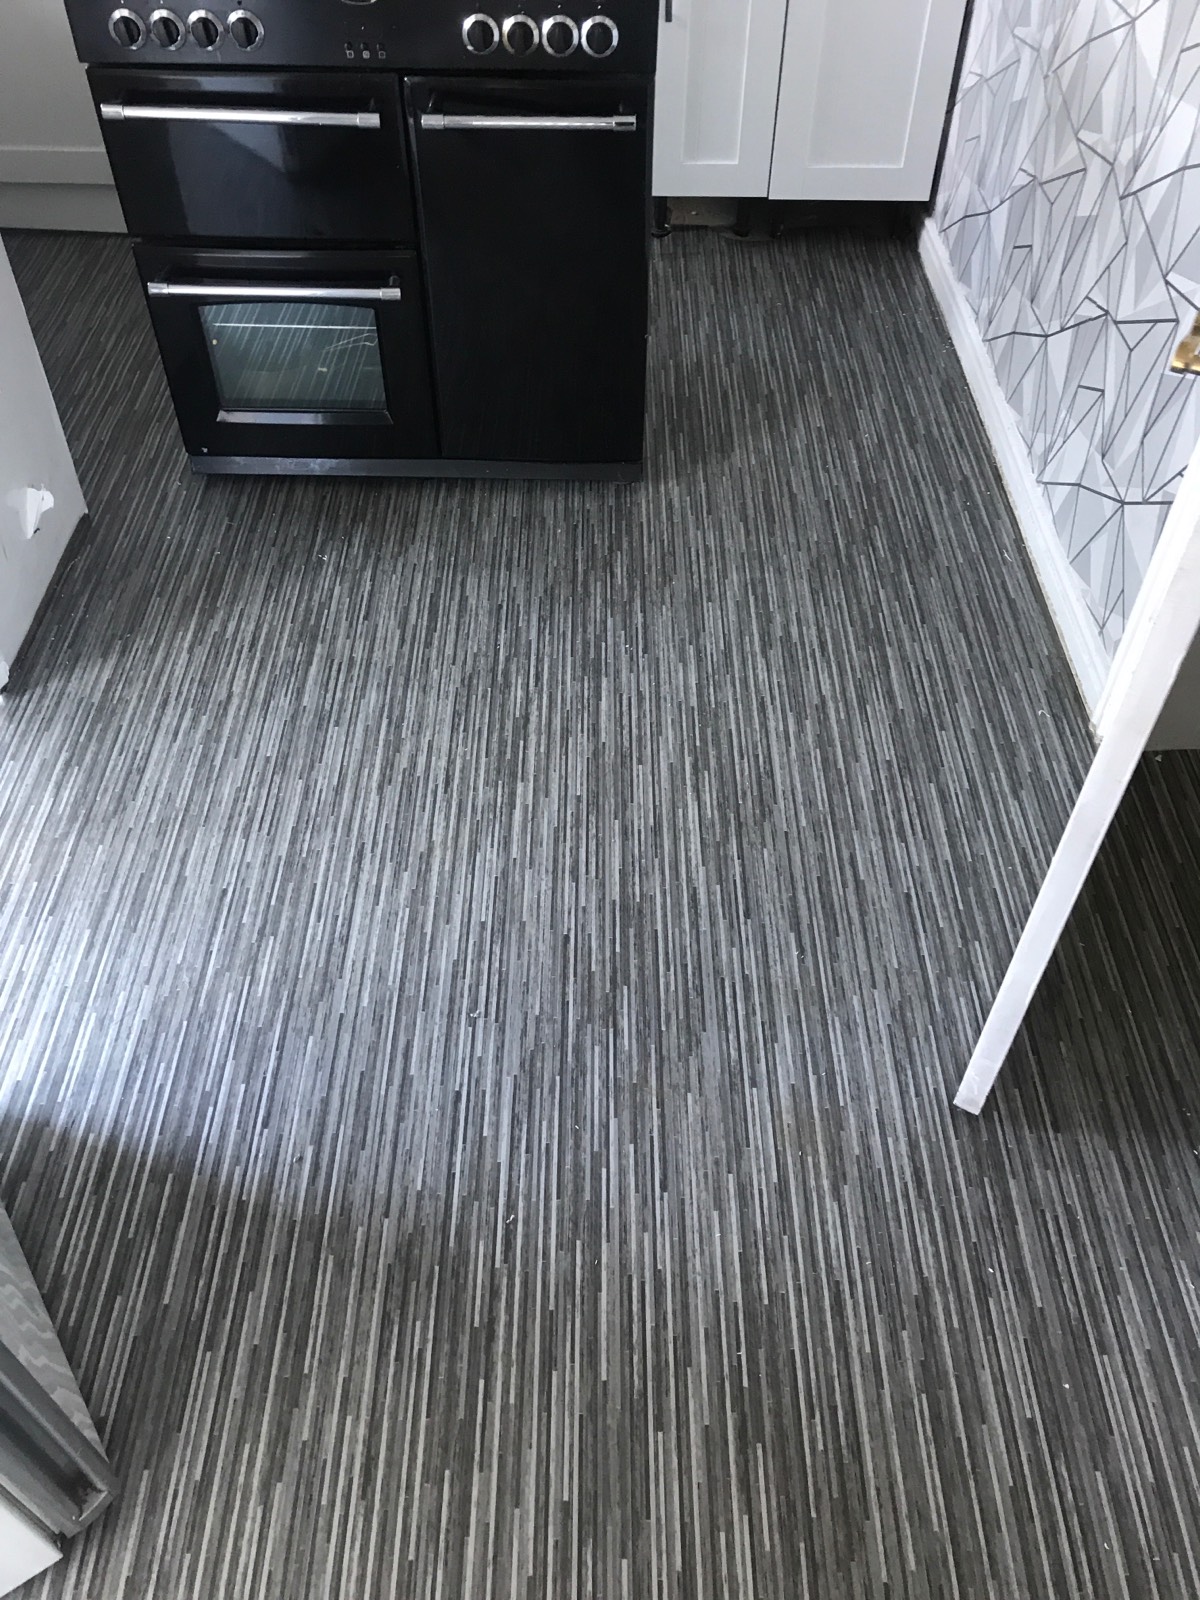 patterned grey vinyl flooring in kitchen with black oven 